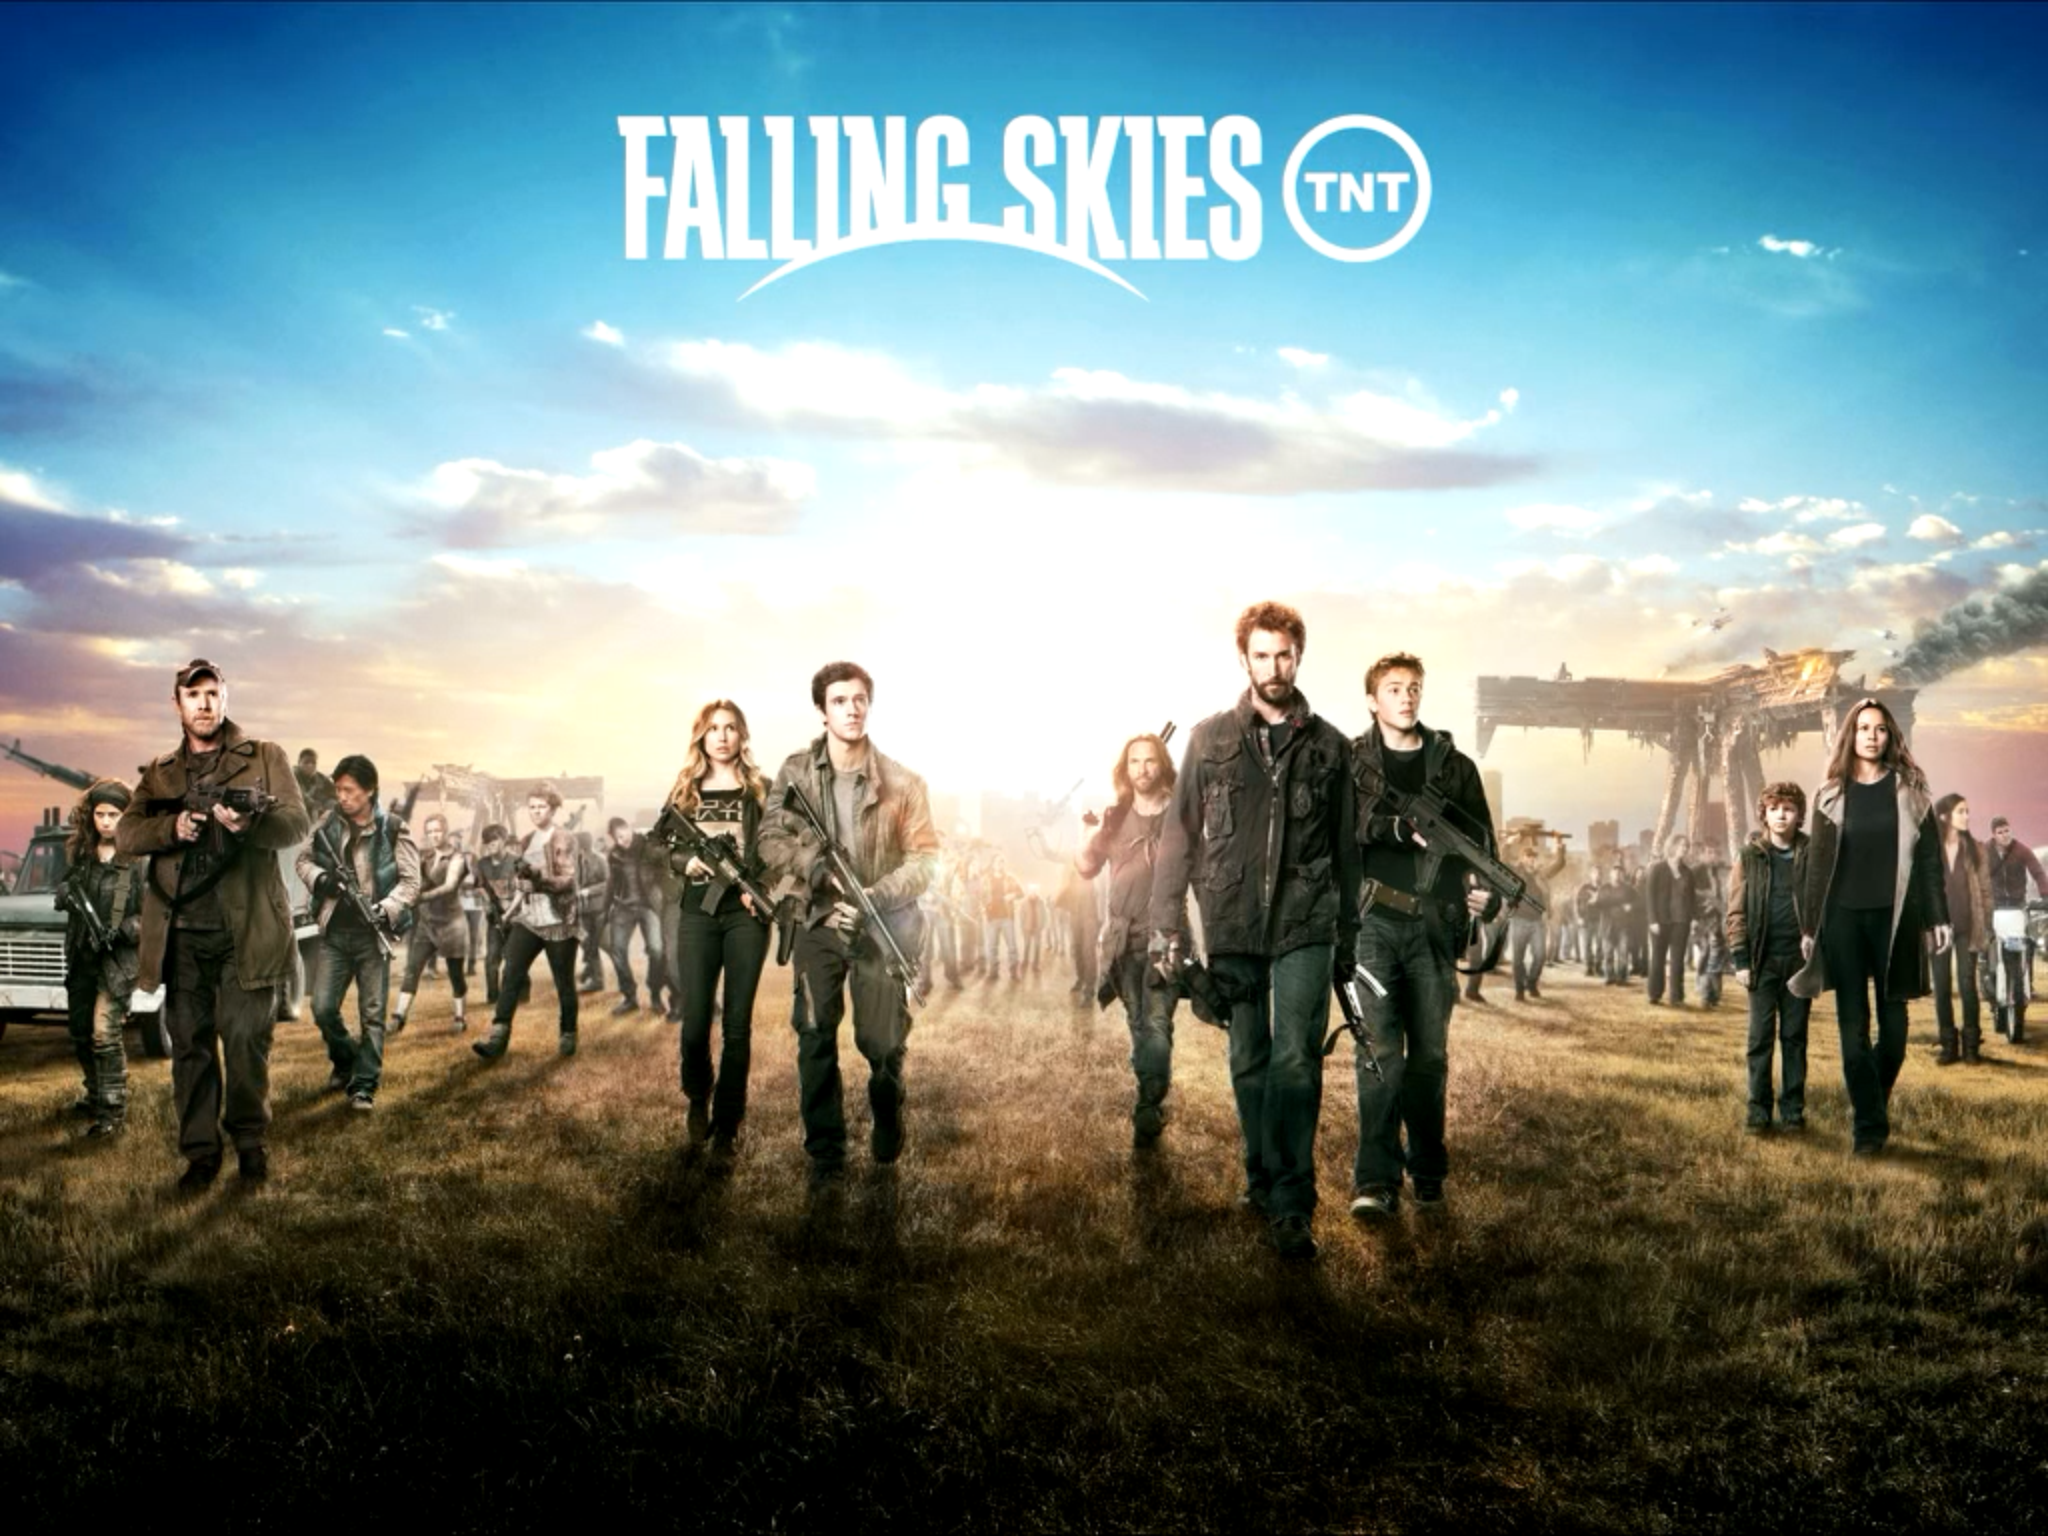 Amazing Falling Skies Pictures & Backgrounds